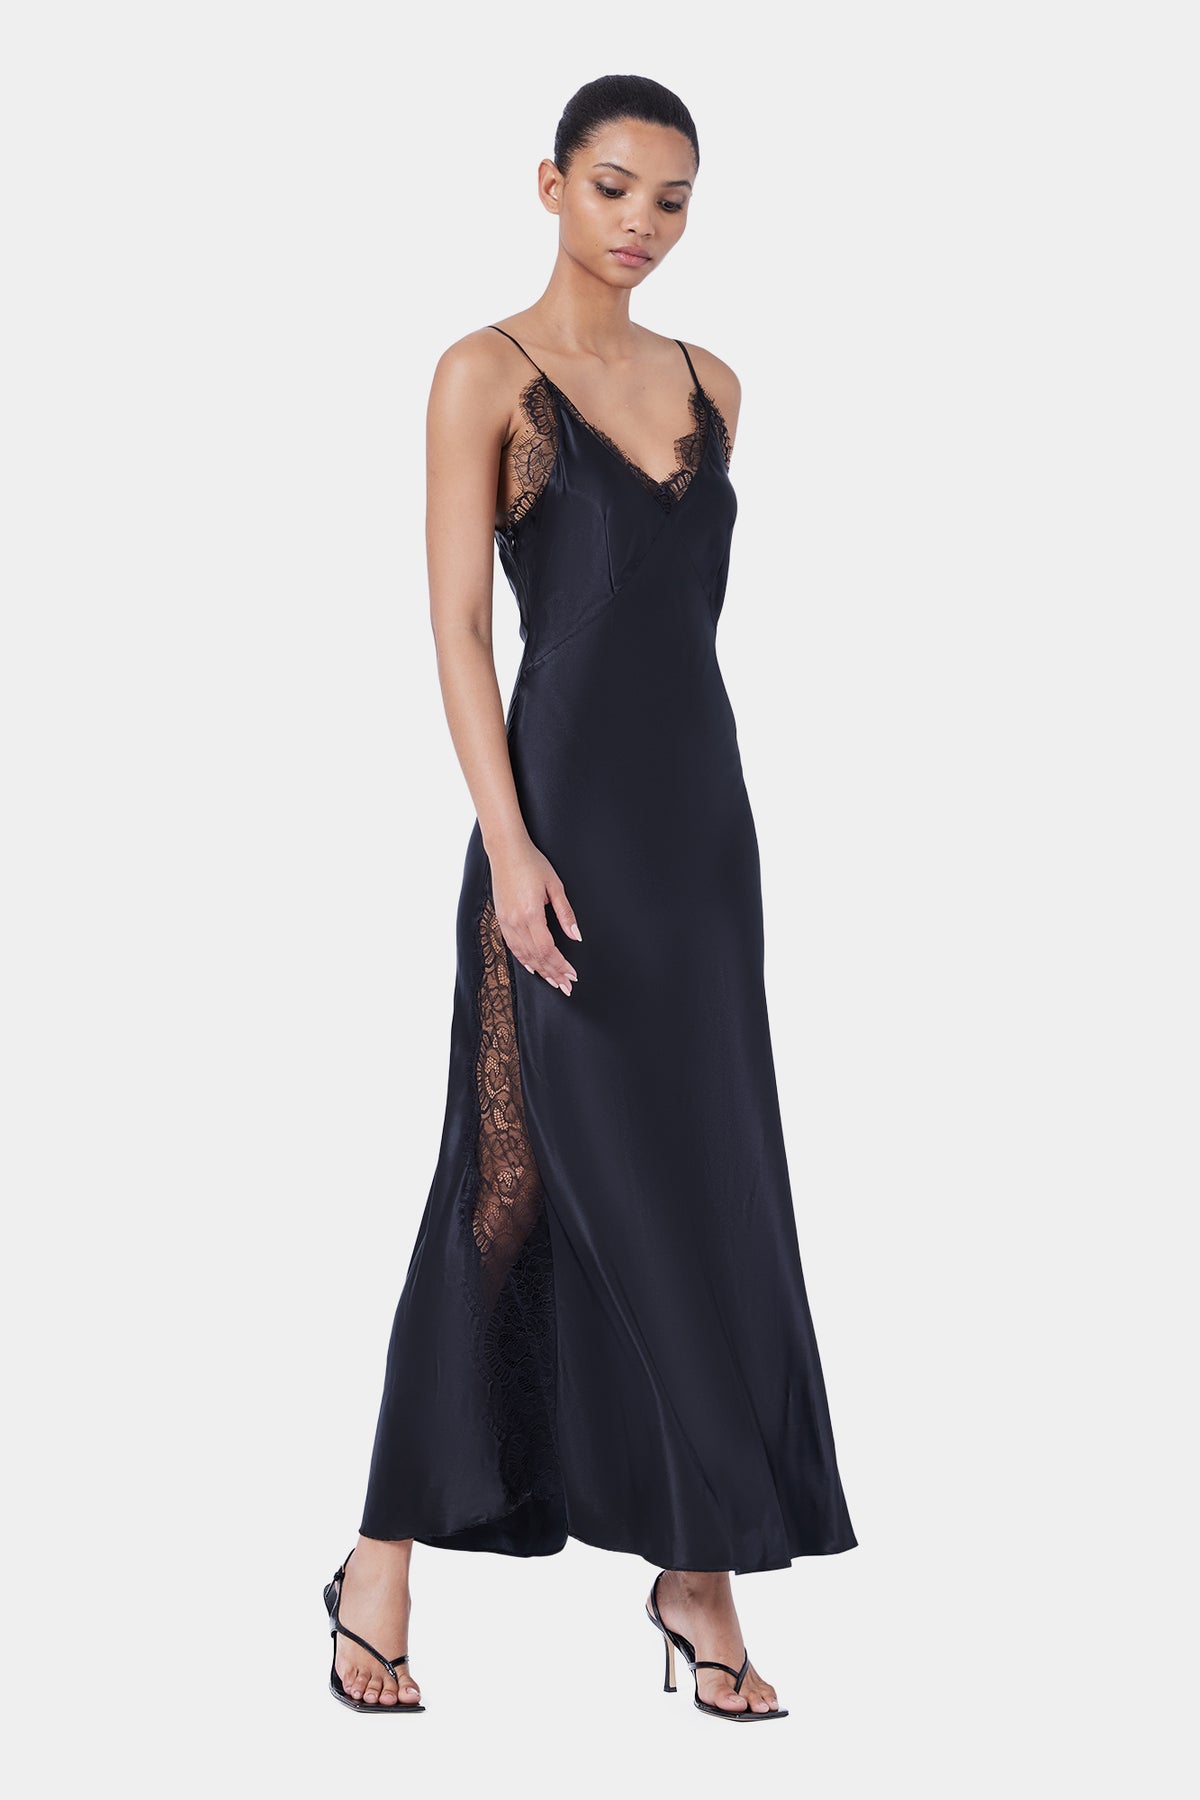 The Cascading Lace Maxi Dress By GINIA In Black